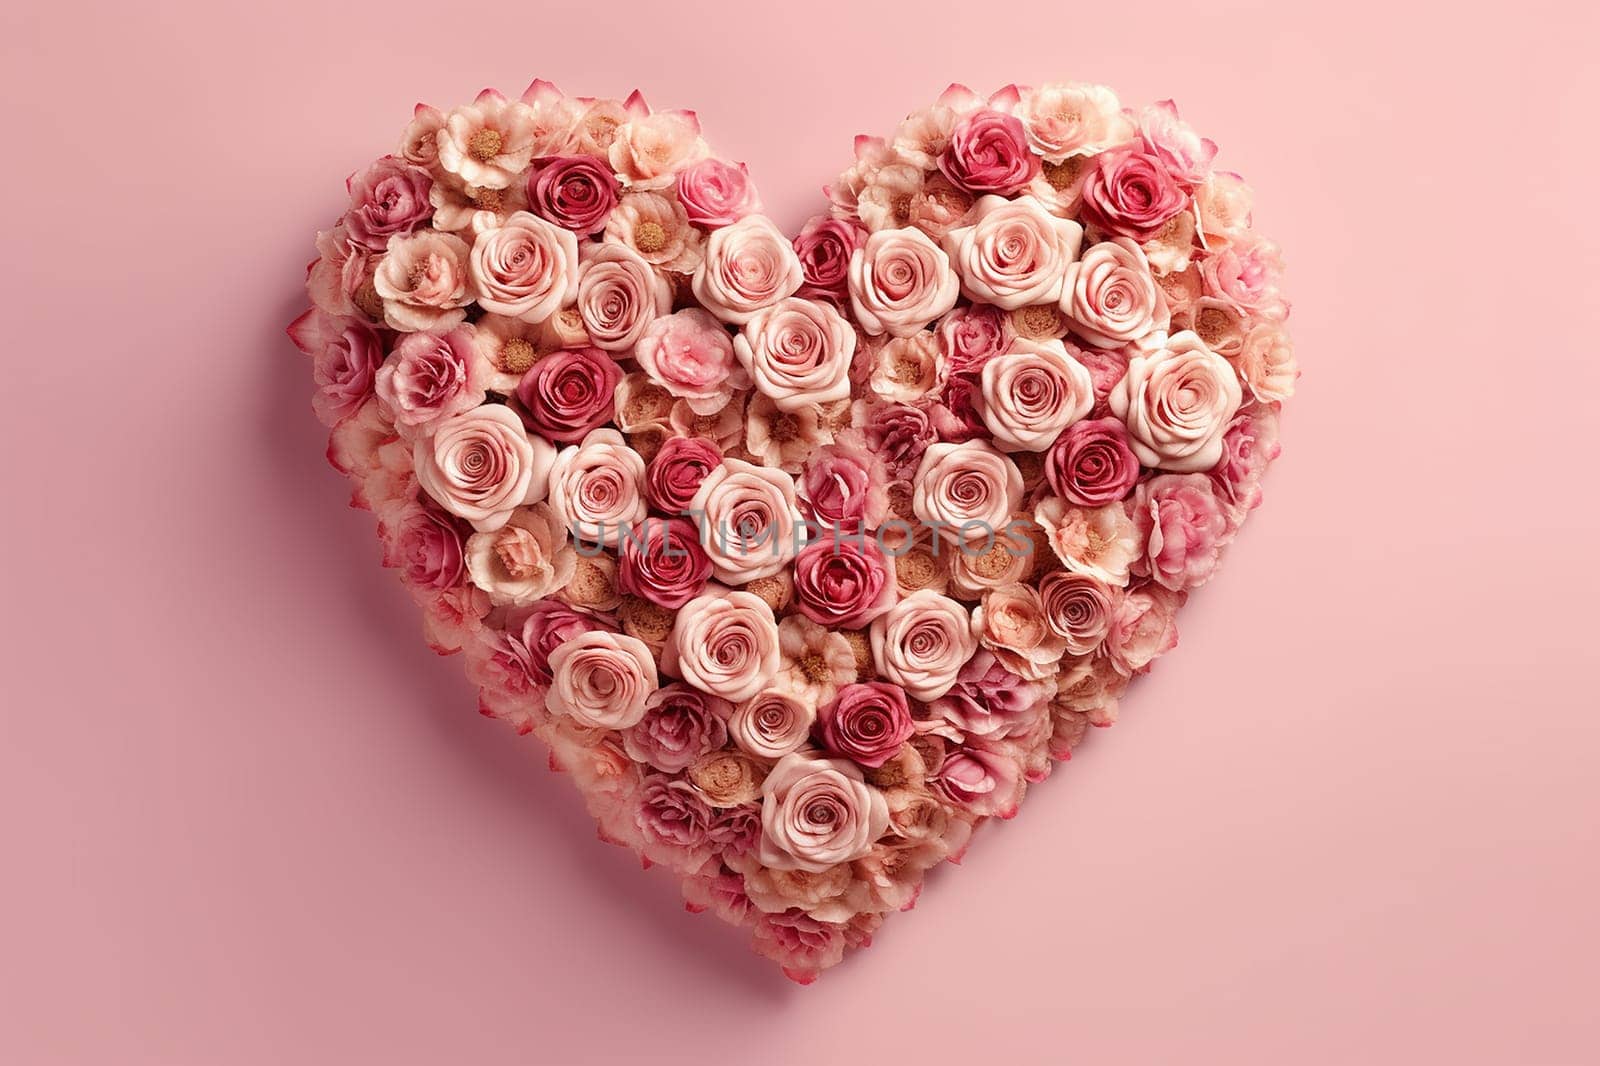 Heart shaped arrangement of roses in shades of pink and white on a pastel background.